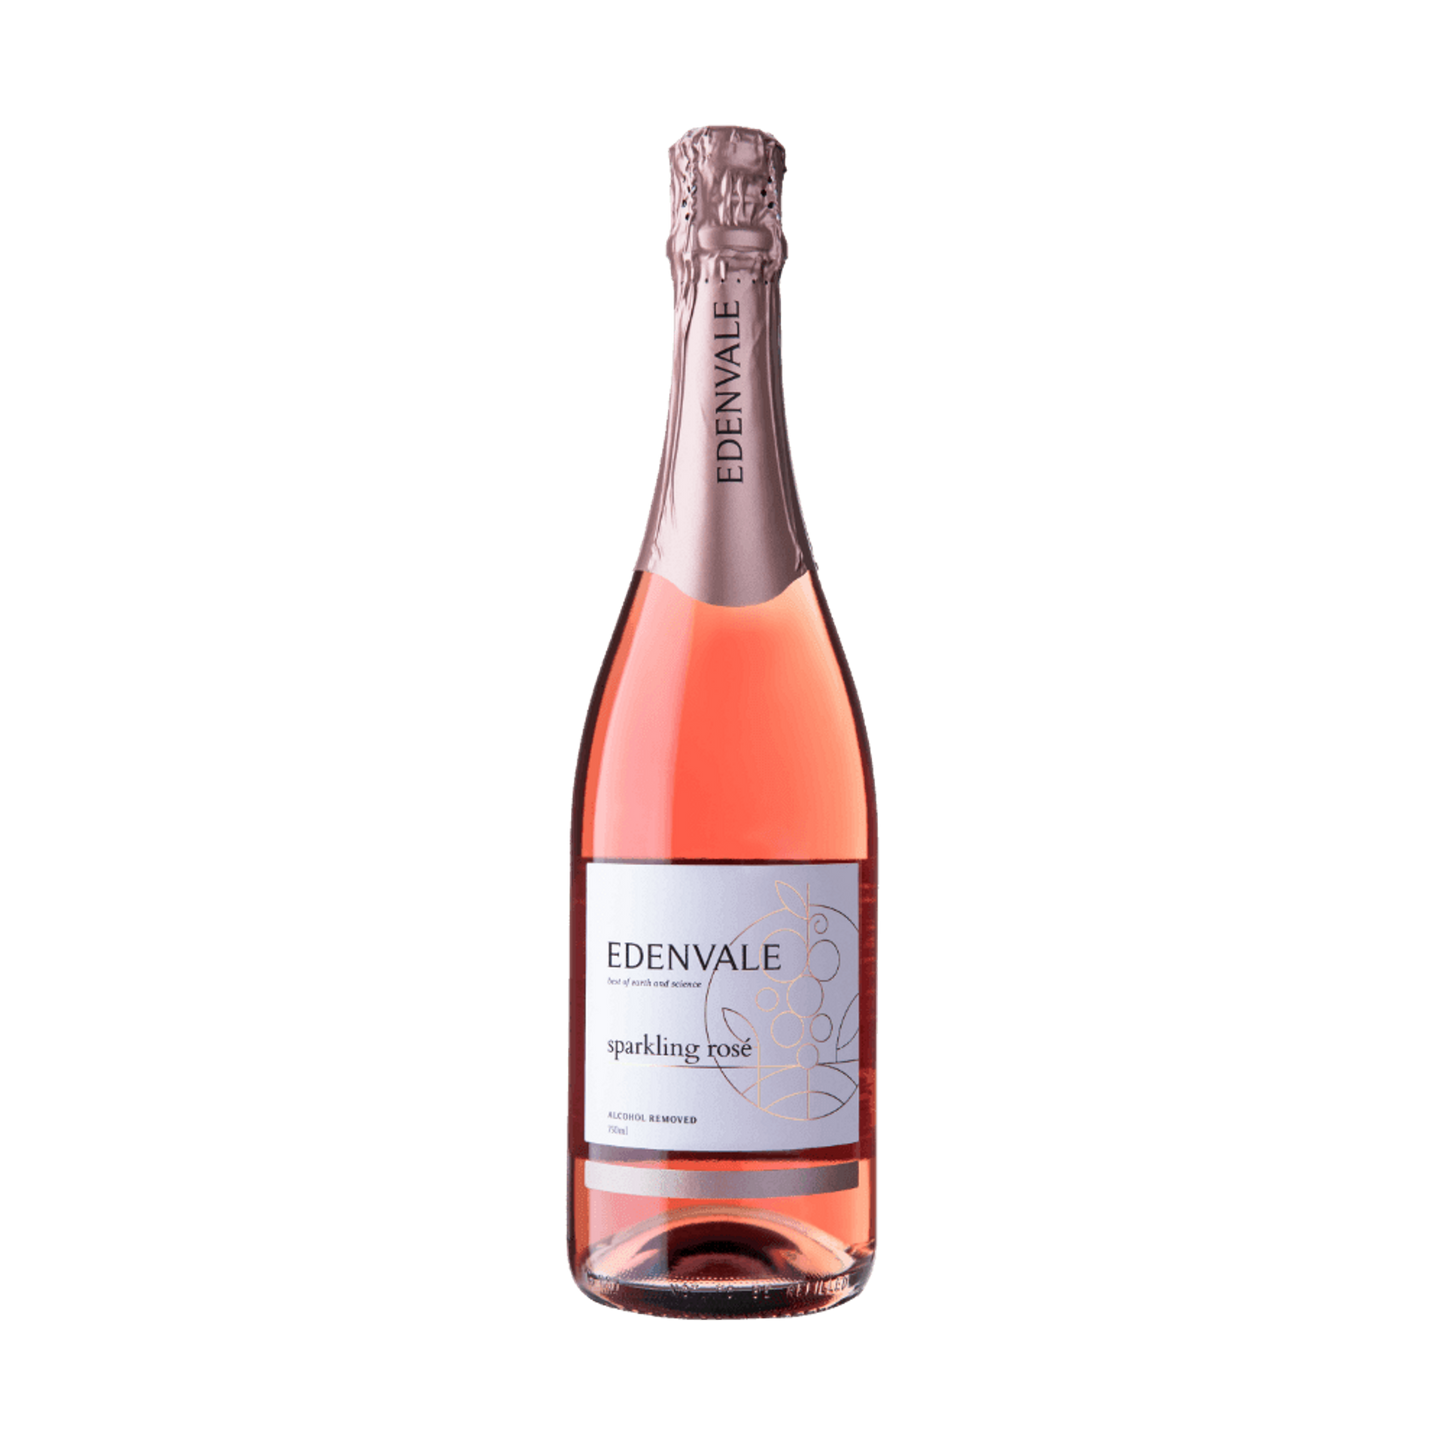 Edenvale Sparkling Rosé Canada - Alcohol Free Wine from Australia - Great Tasting Sparkling Wine - Tastes like real wine!